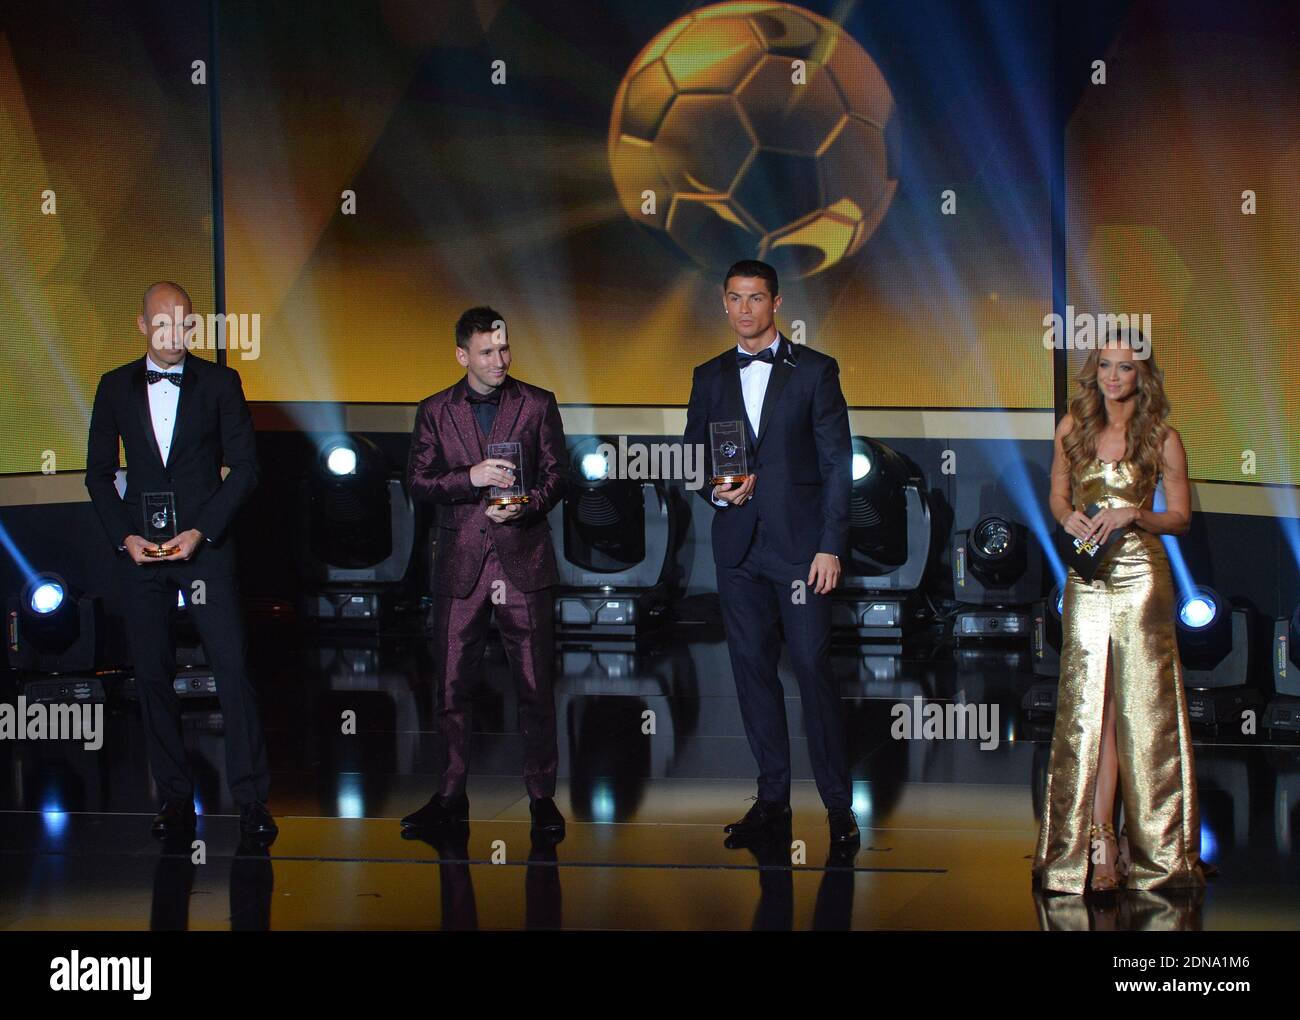 Netherlands' Arjen Robben, Argentina's Lionel Messi and Portugal's  Cristiano Ronaldo during the FIFA Ballon D'Or 2014 Award Gala at the  Kongresshalle in Zurich, Switzerland on January 12, 2015. Photo by  Christian Liewig/ABACAPRESS.COM